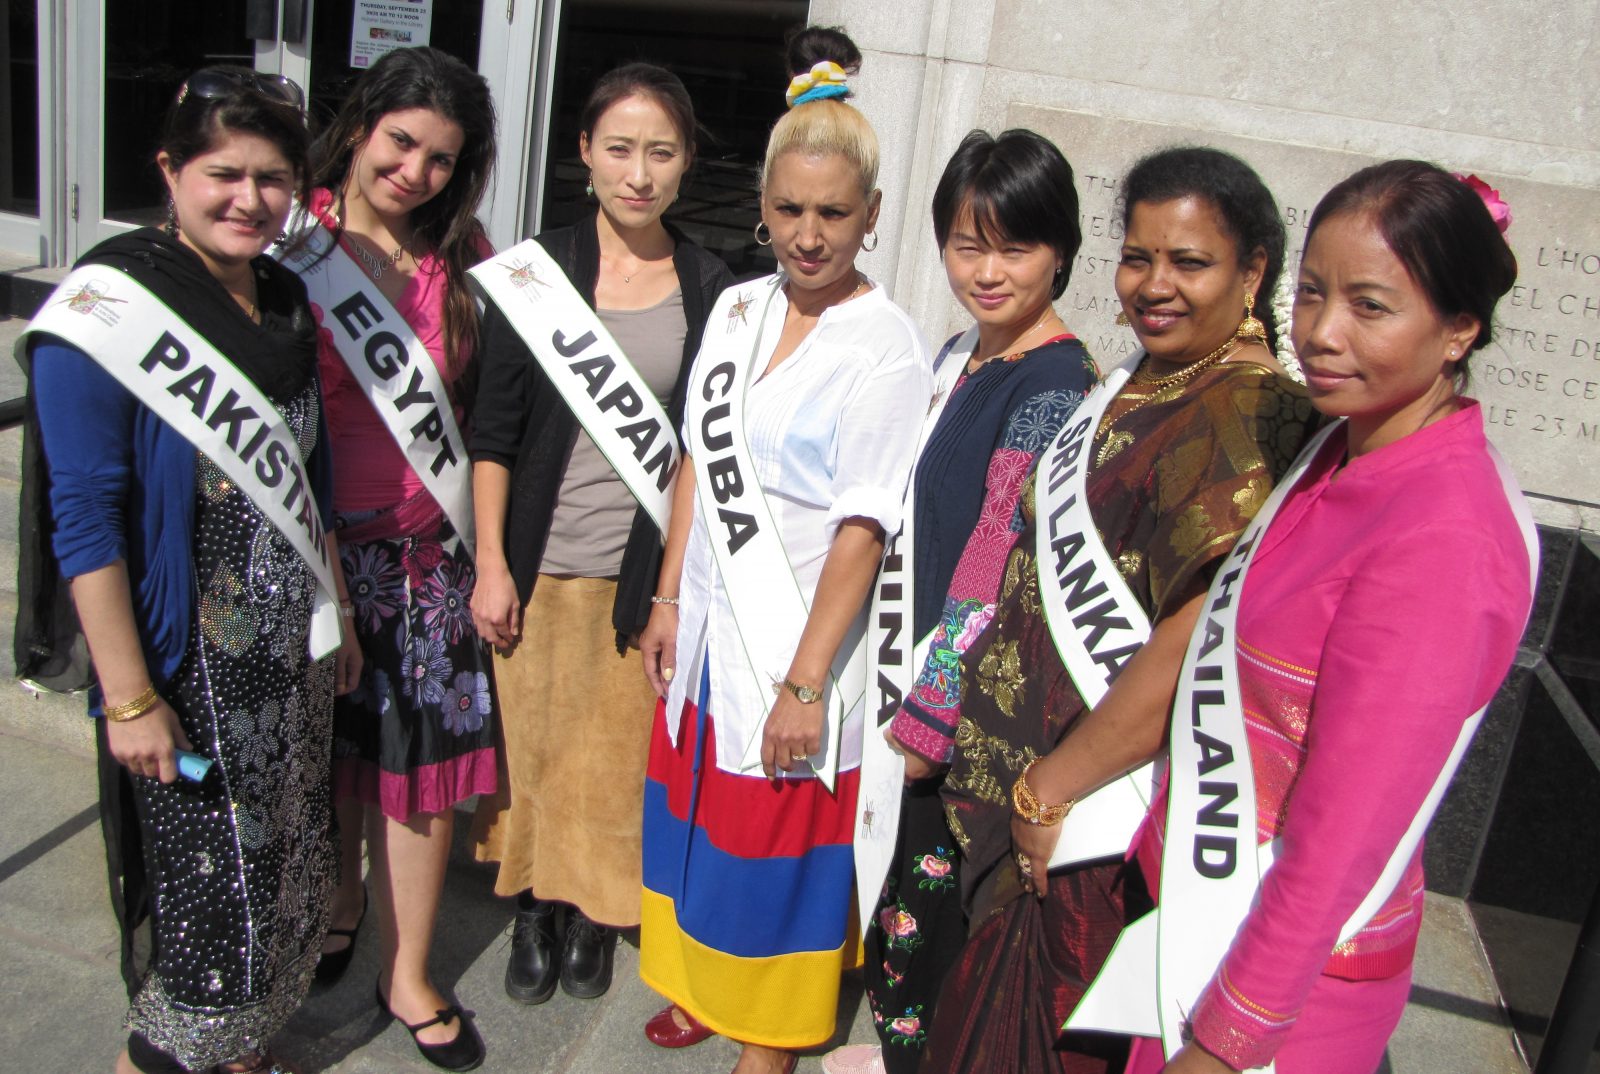 Multicultural festival parades through Cornwall this weekend